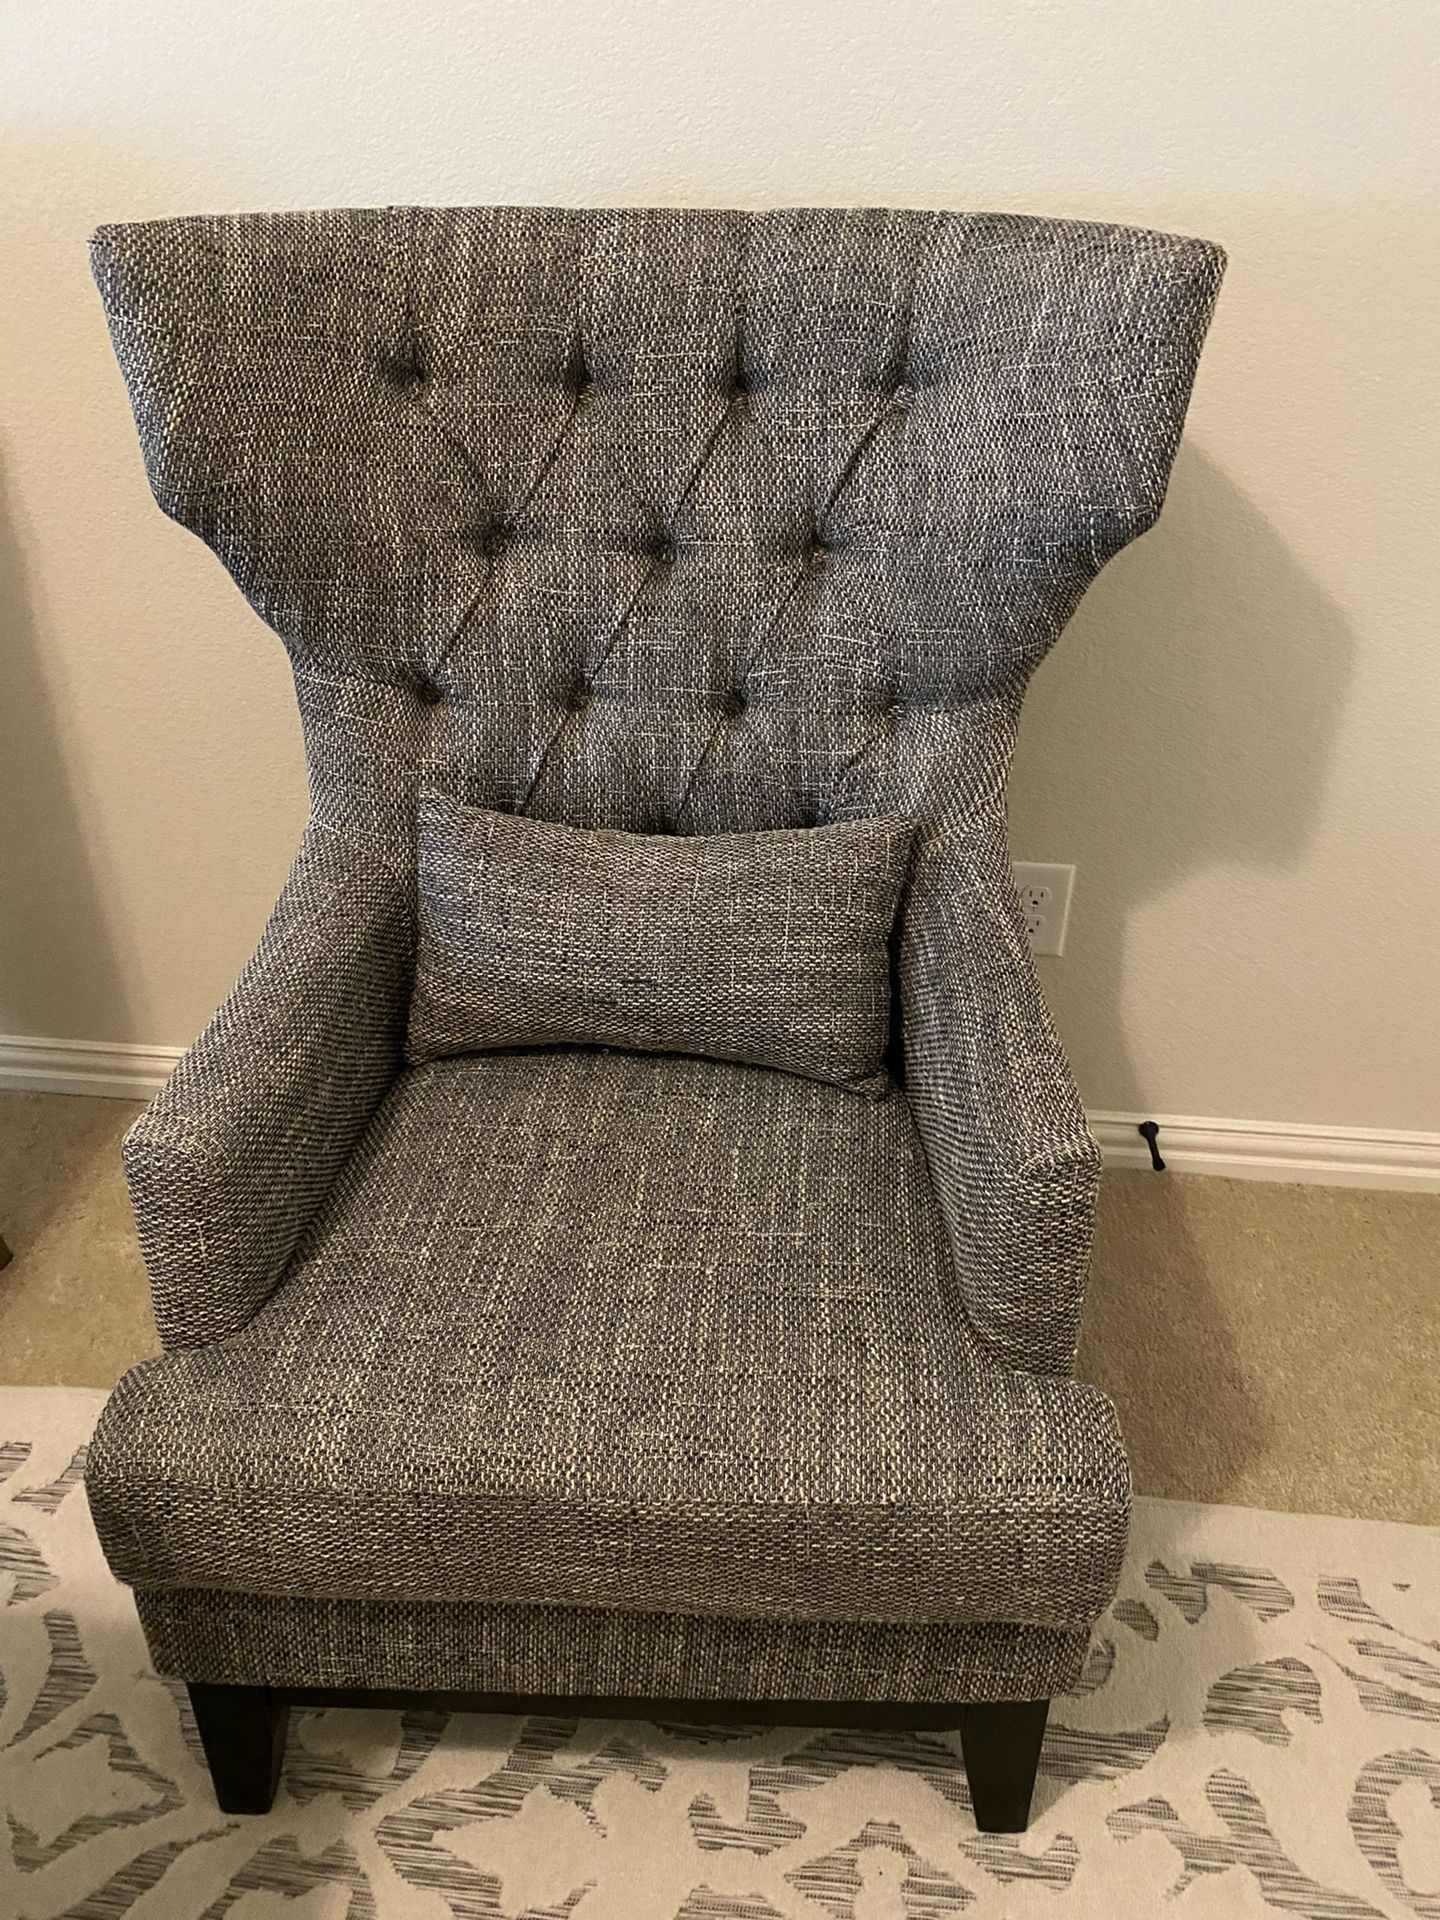 Black And White tweed chair - Gently used Condition 